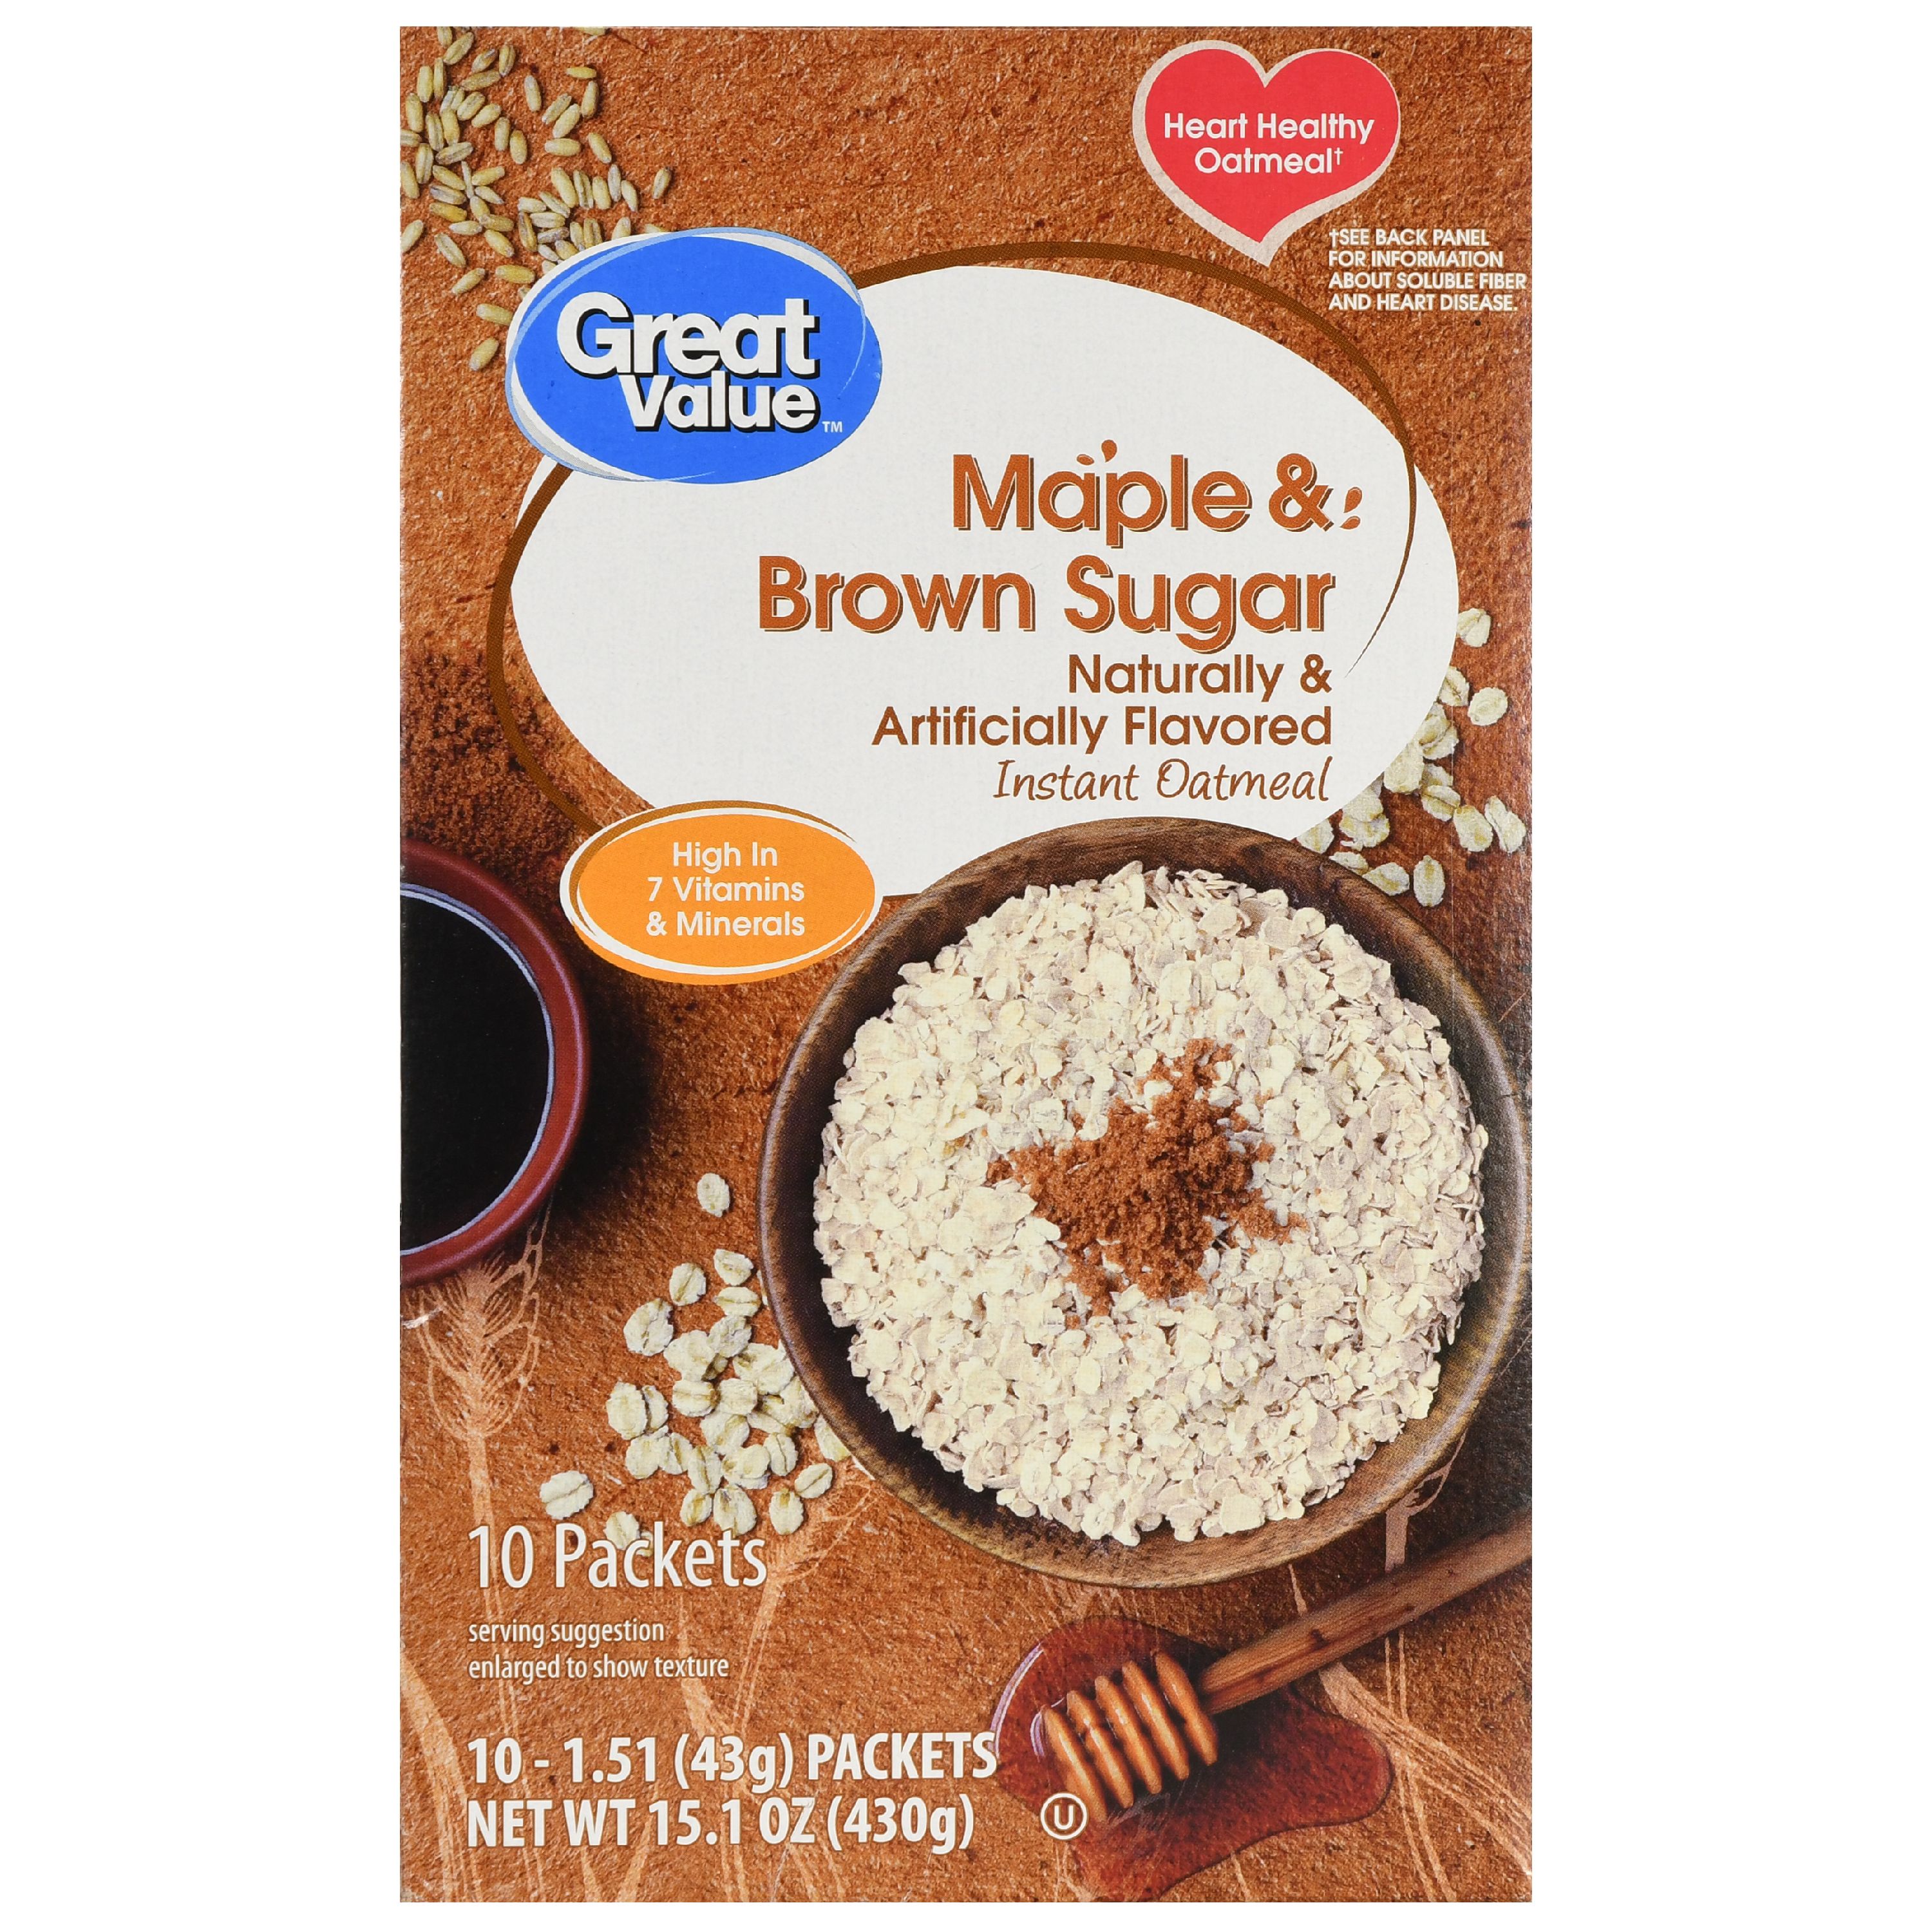 (4 Pack) Great Value Maple & Brown Sugar Instant Oatmeal, 1.51 Oz, 10 Count Image